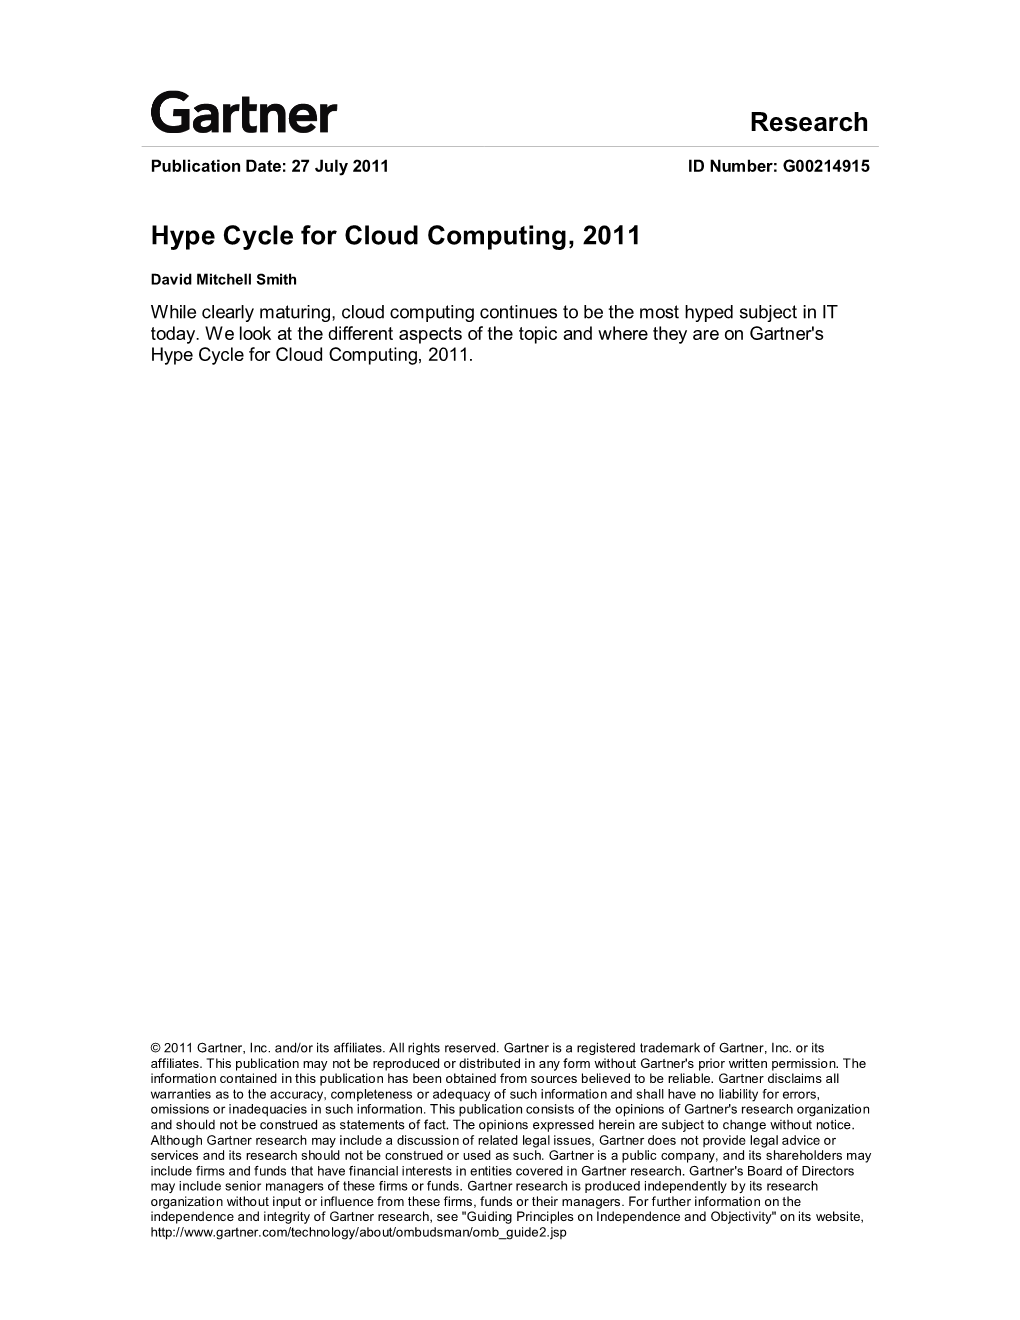 Hype Cycle for Cloud Computing, 2011